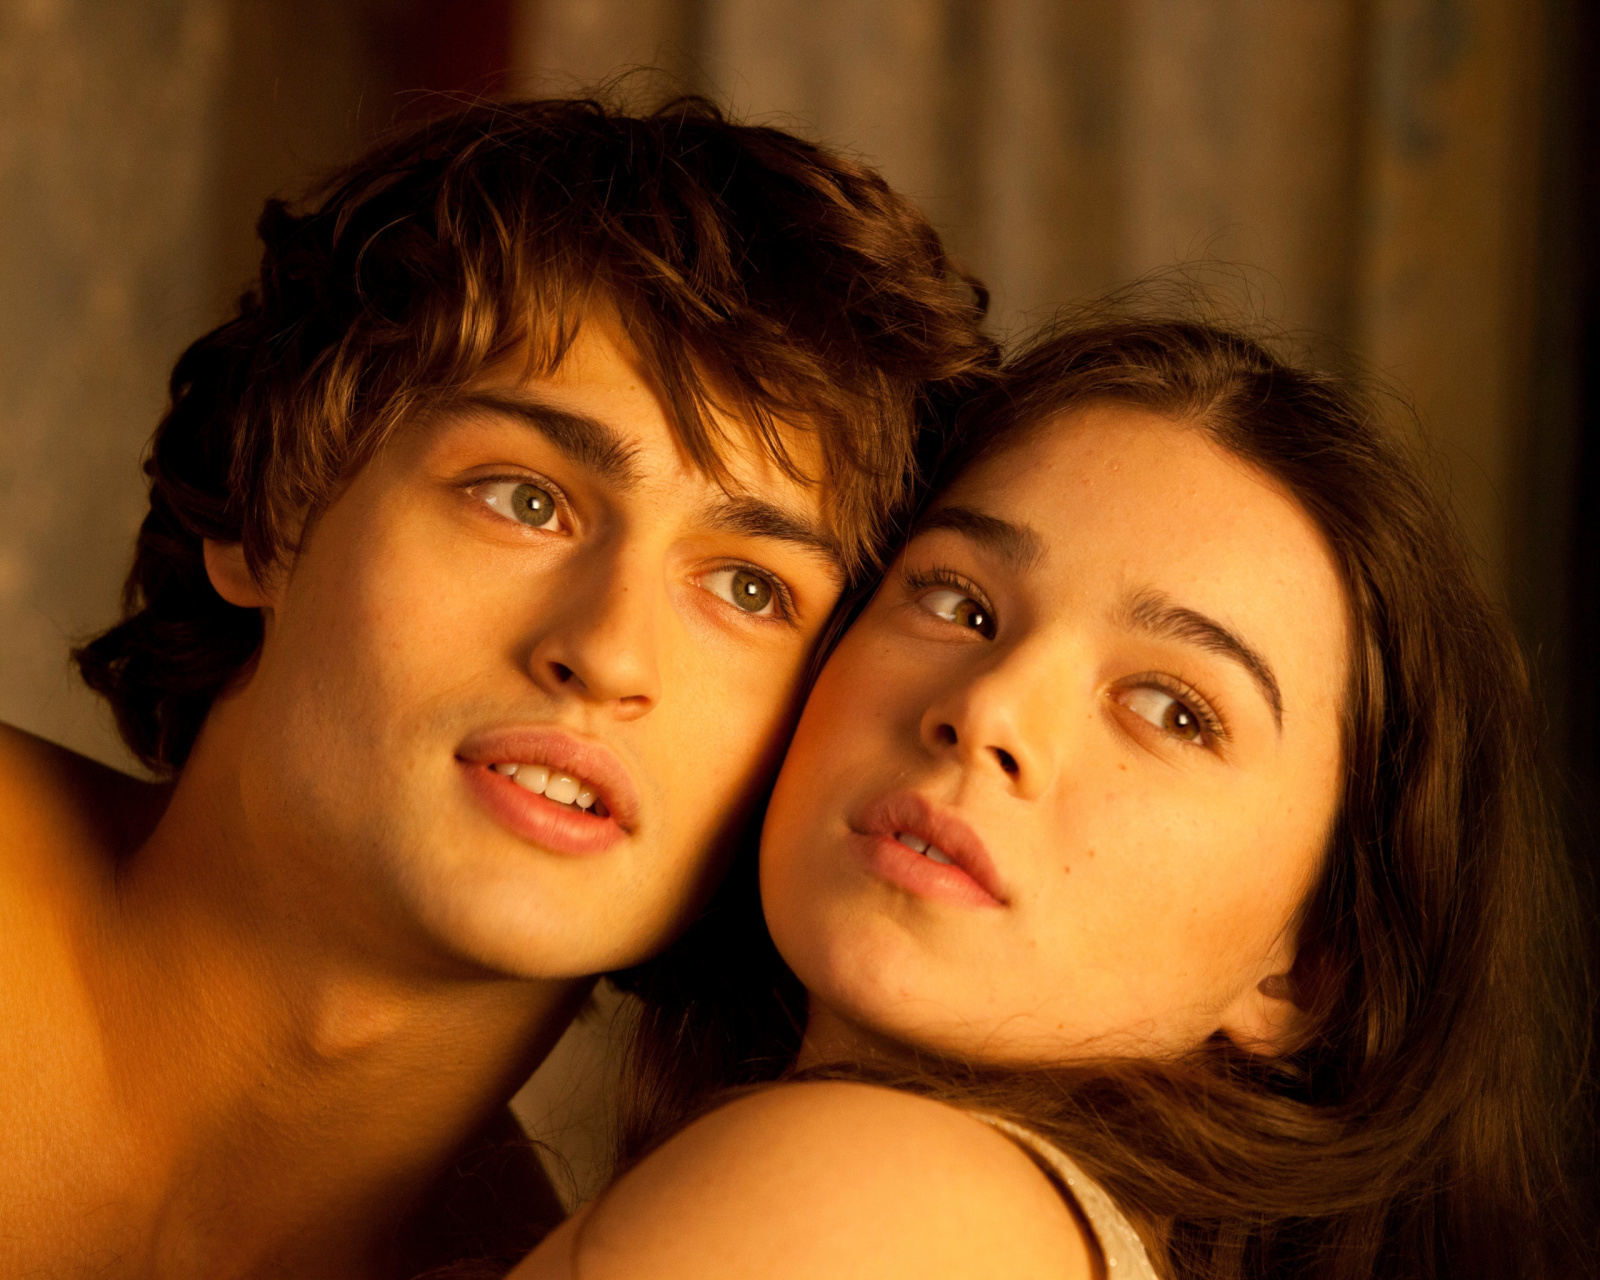 Das Romeo and Juliet with Hailee Steinfeld and Douglas Booth Wallpaper 1600x1280